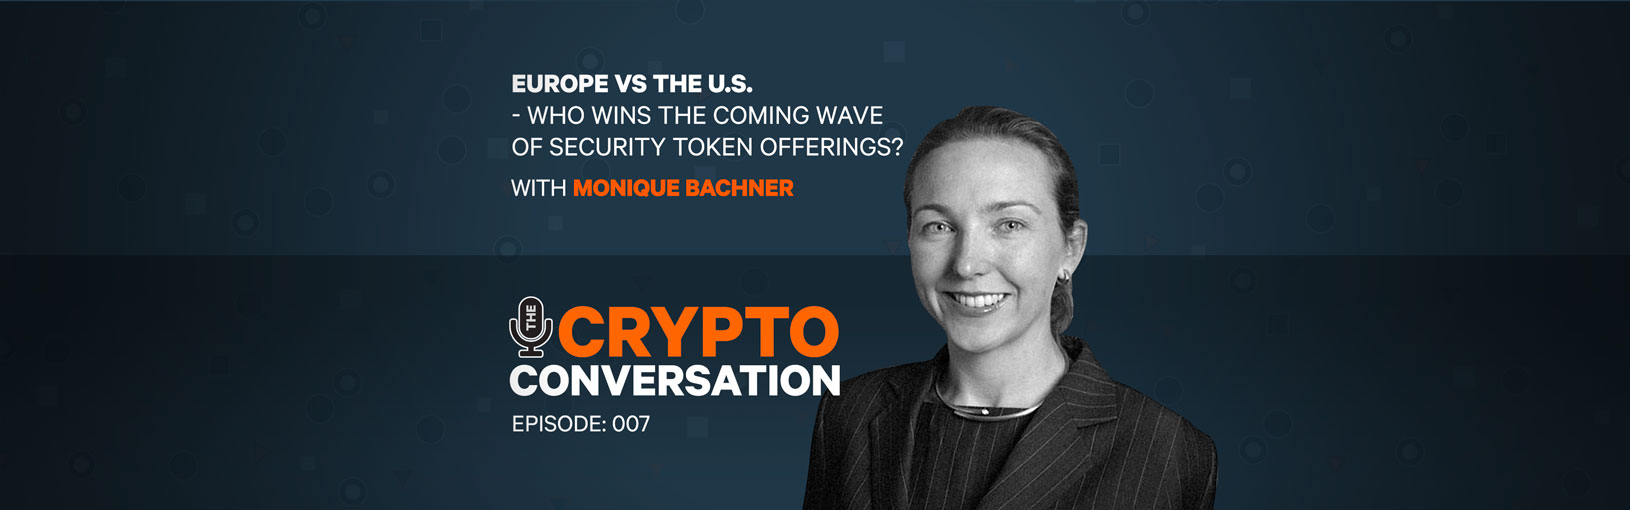 Europe Vs The U.S. Who wins the coming wave of Security Token Offerings?